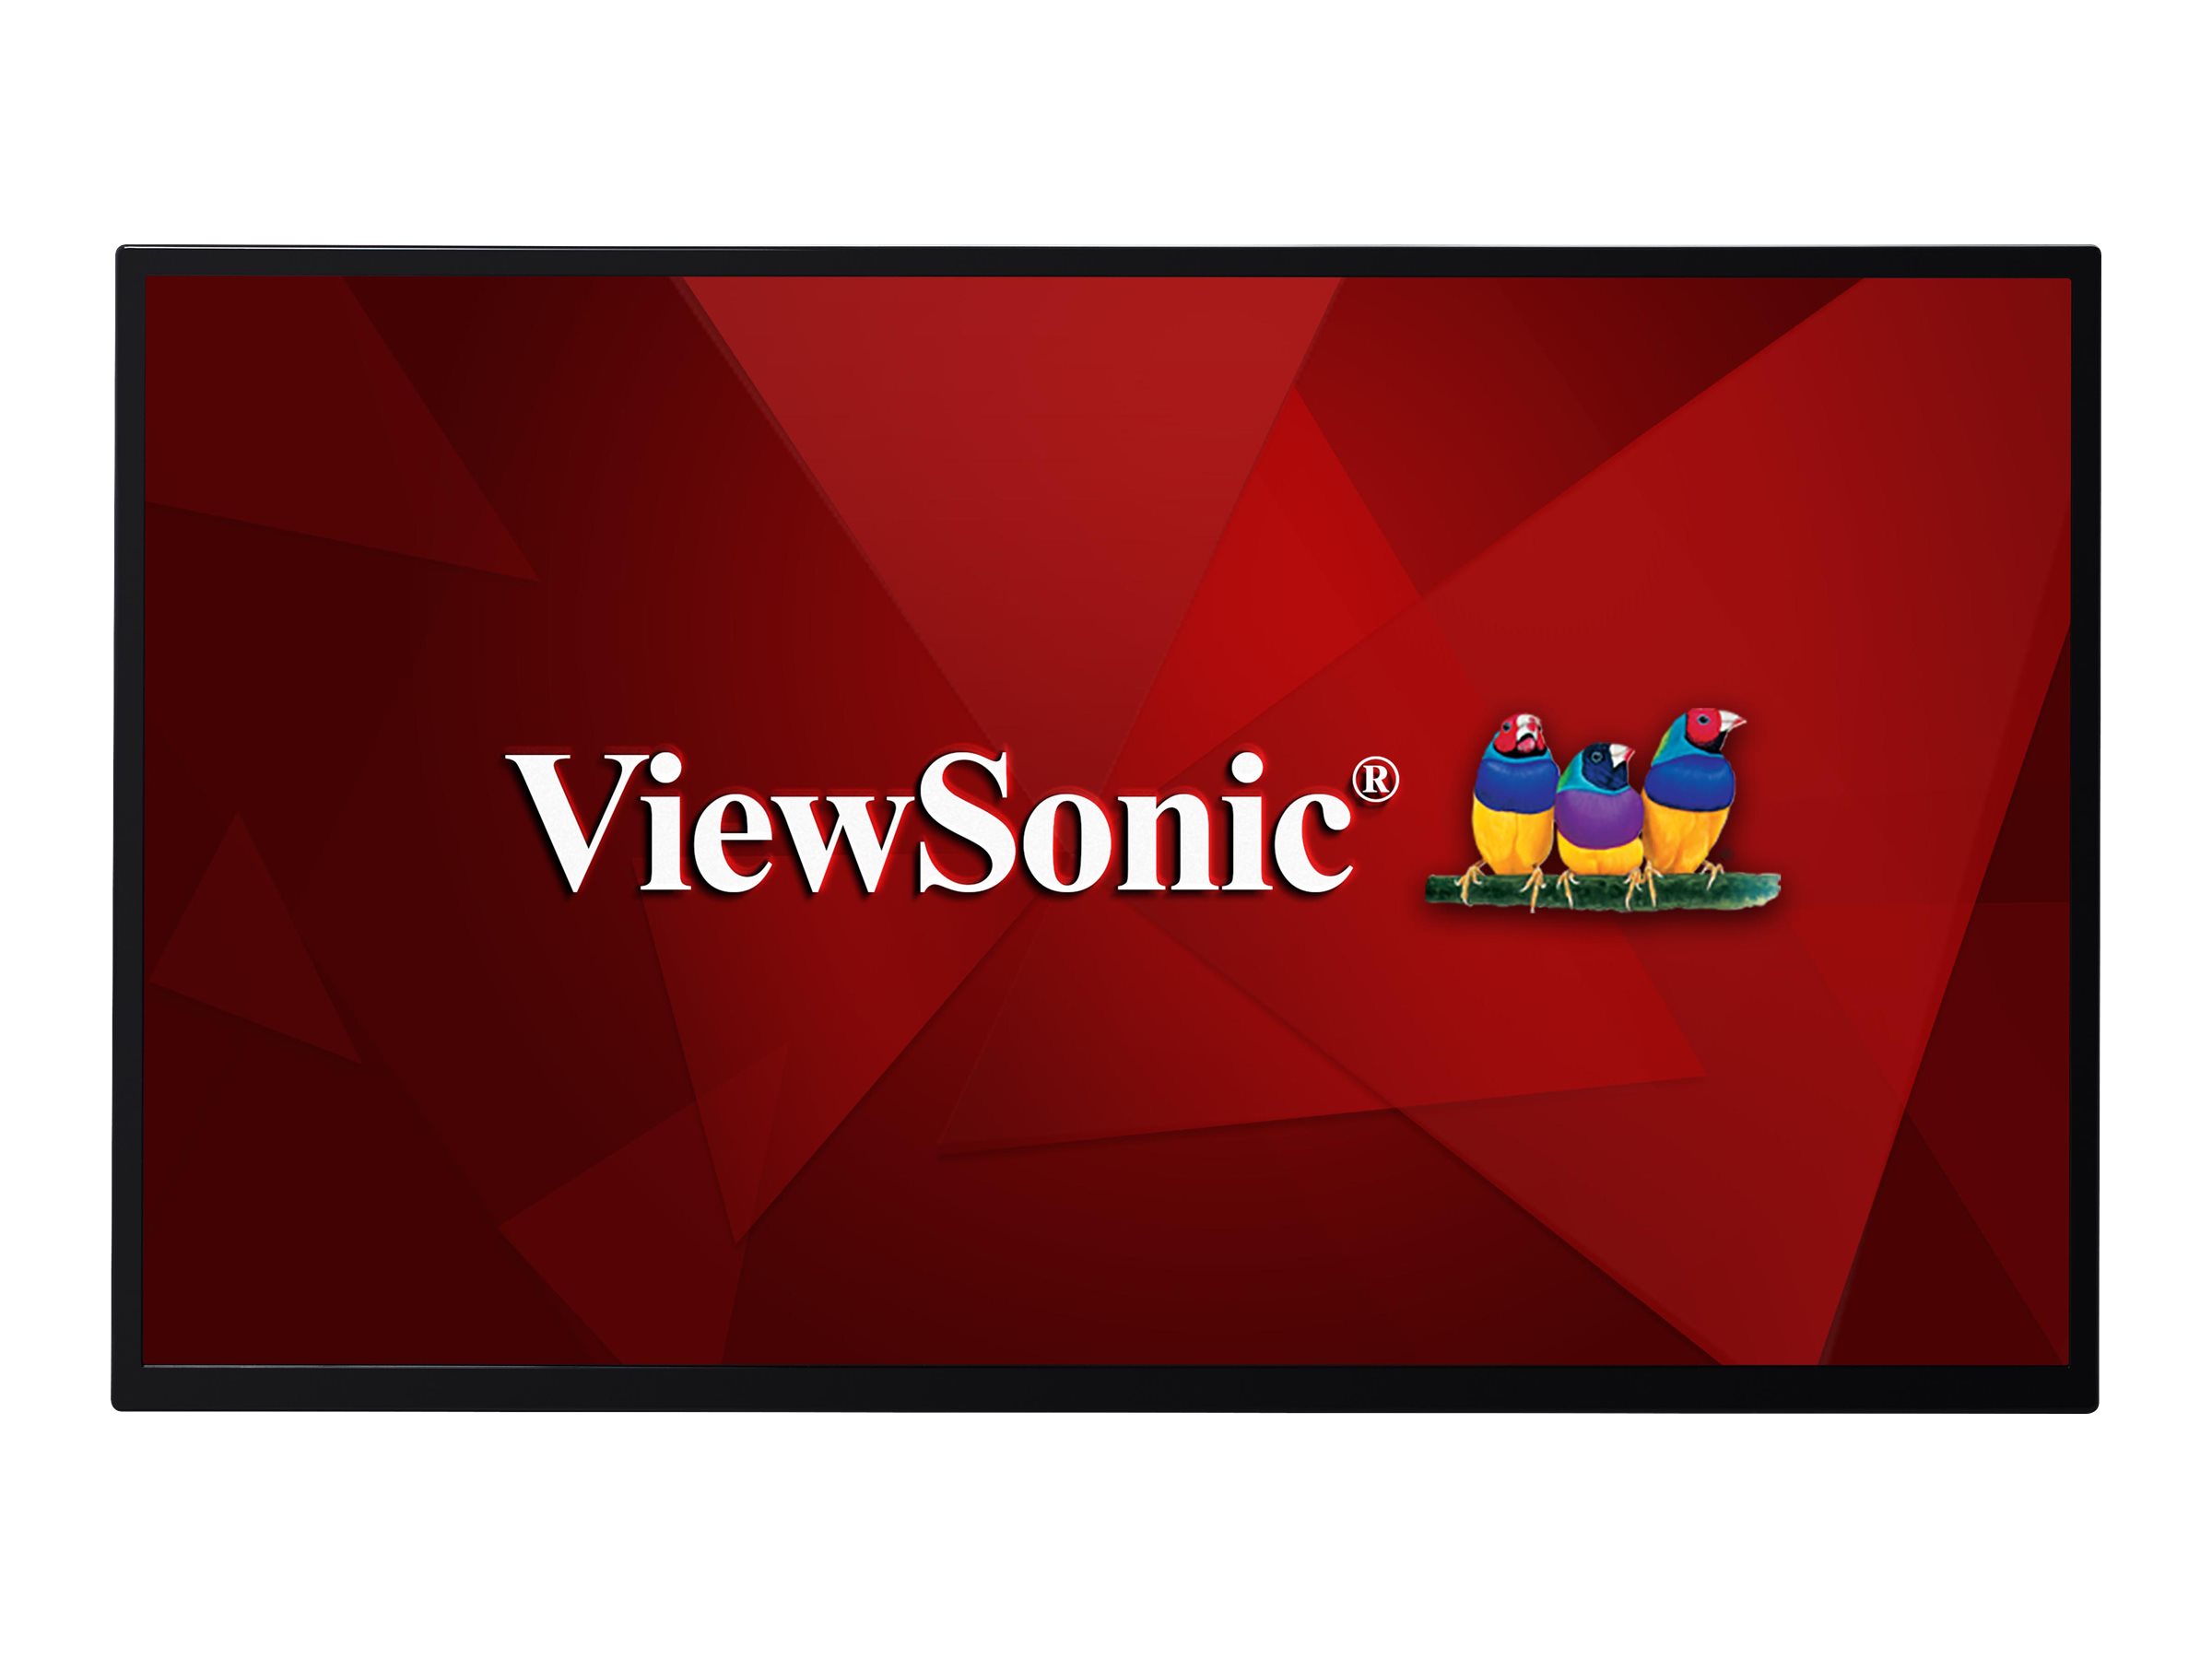 Viewsonic Cde3205 - 32" Diagonal Class (31.5" Viewable) Led-backlit Lcd Display - Signage / Hospitality - 1080p (full Hd) 1920 X 1080 - image 1 of 5